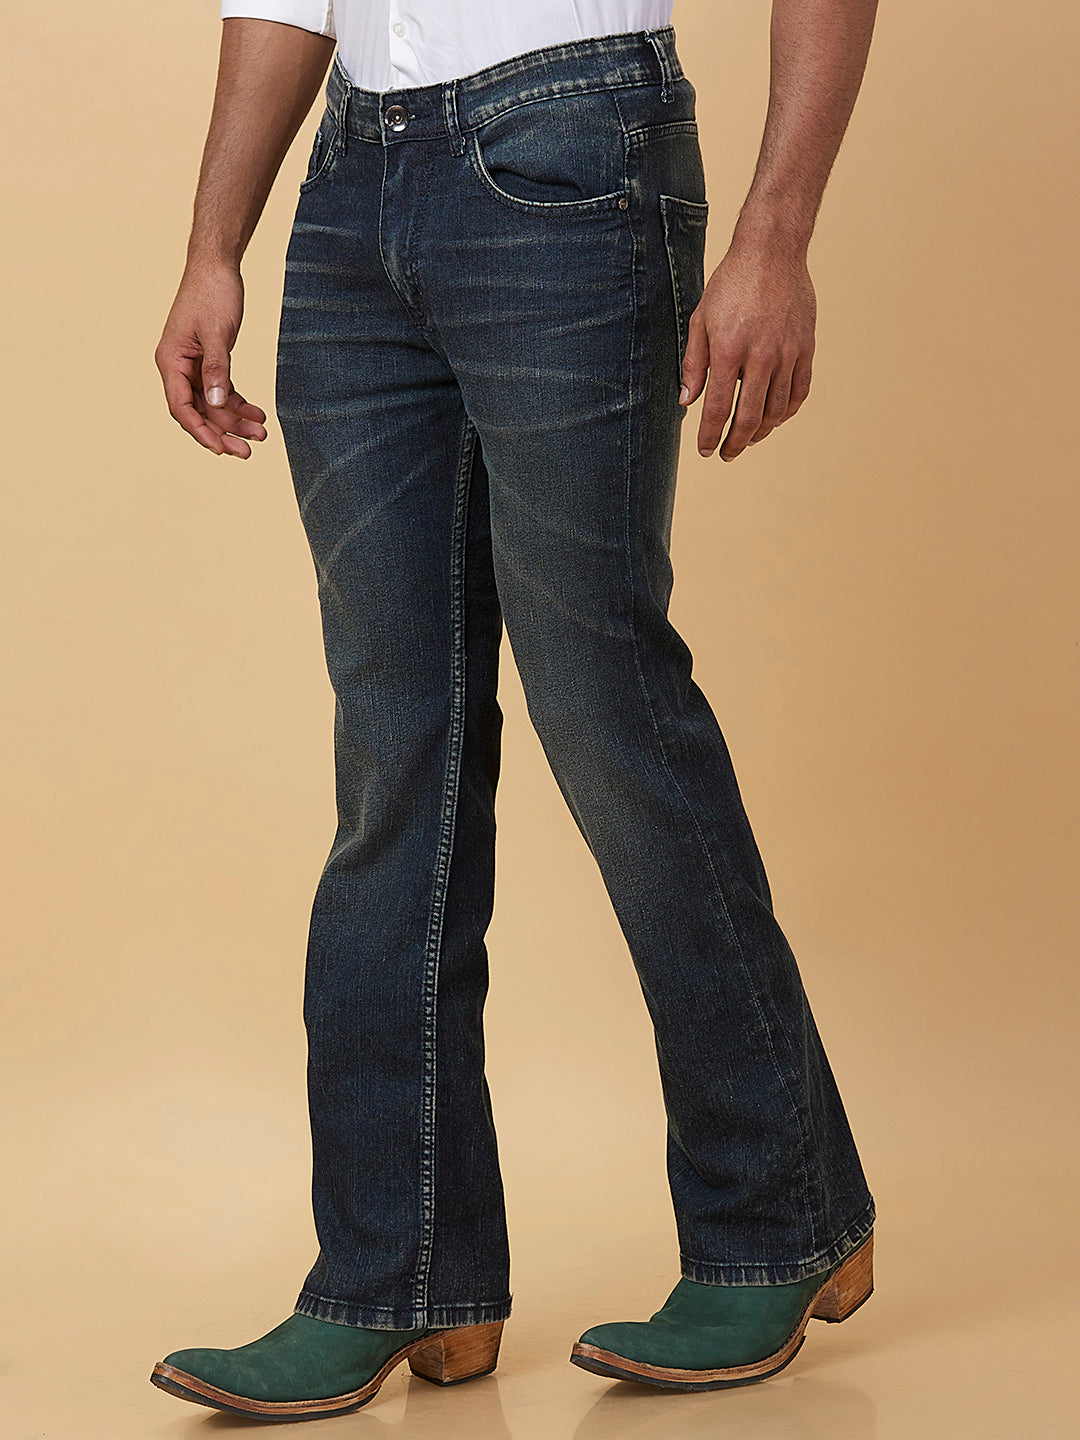 Indigo Blue Boot-cut Jeans and Vintage Tint